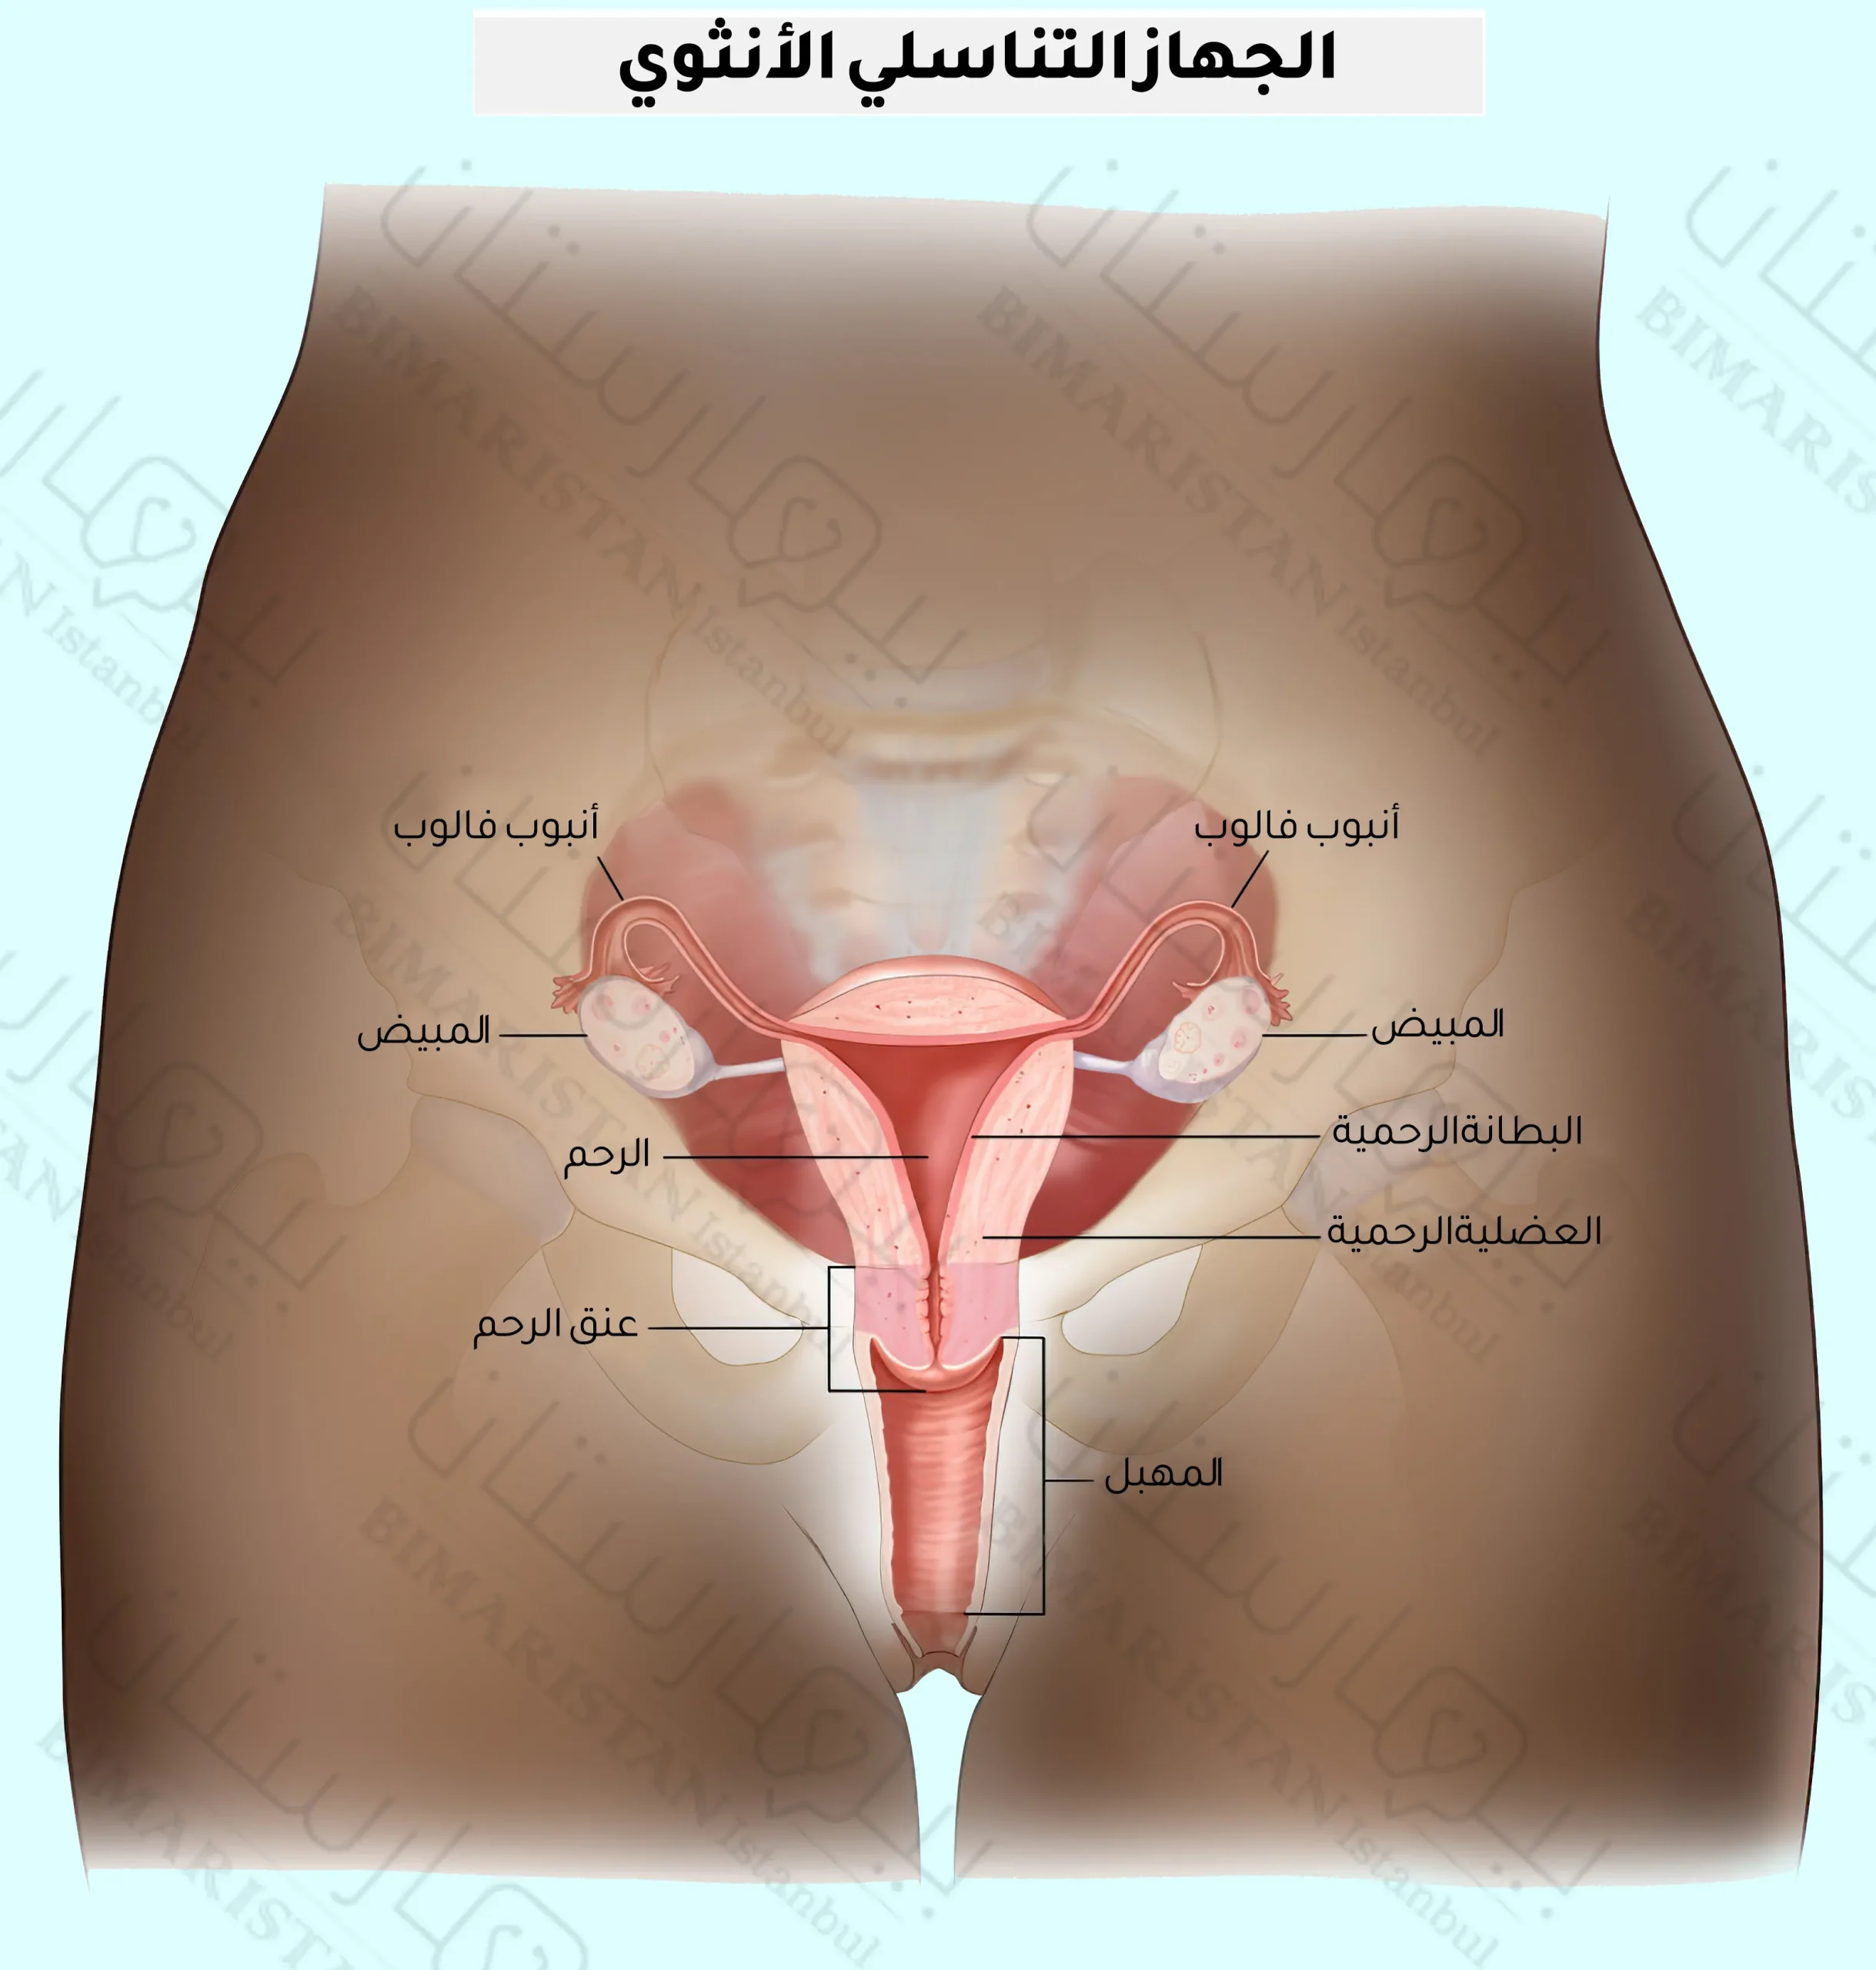 A picture of the female reproductive system and an overview of its components